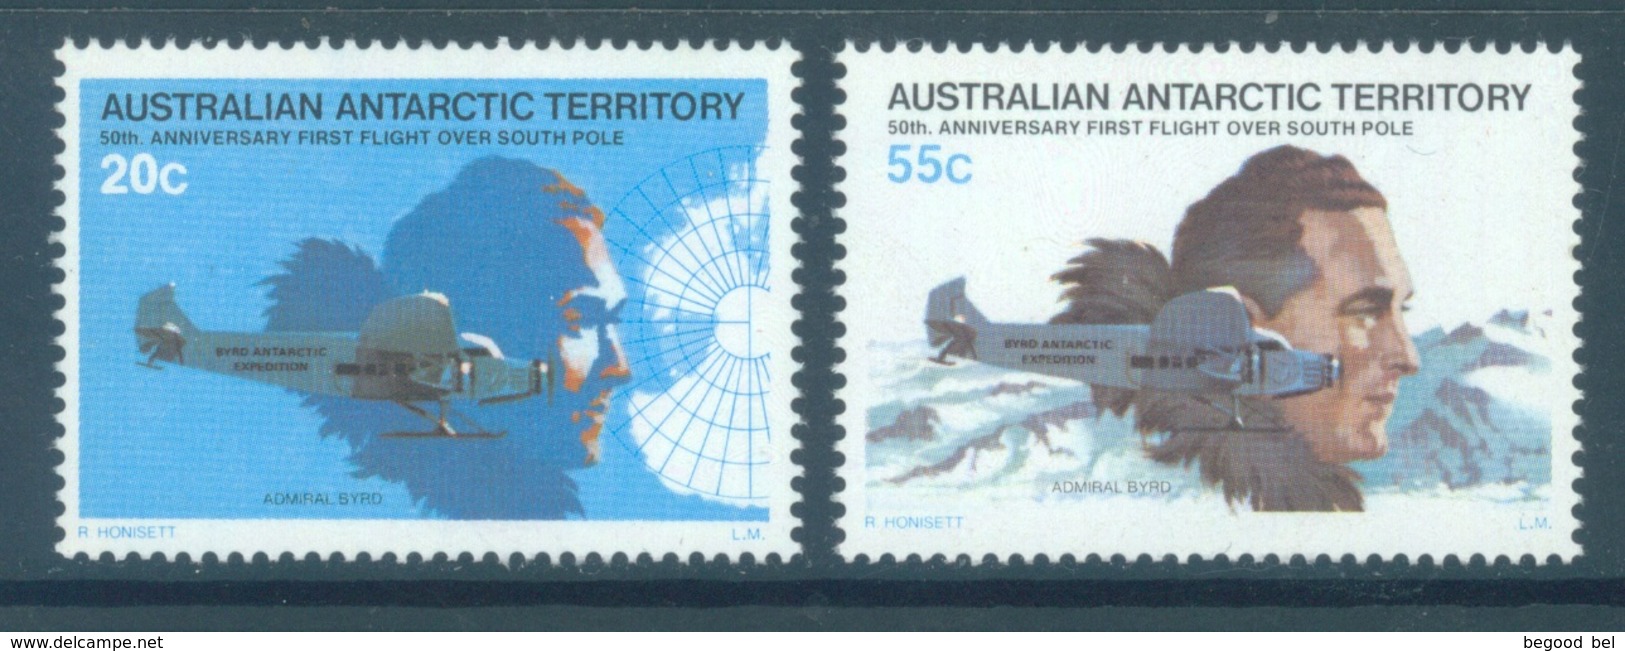 AAT - 1979 - MNH/***  - 50th ANNIVERSARY FIRST FLIGHT OVER SOUTH POLE  - Yv 35-36  - Lot 18755 - Unused Stamps